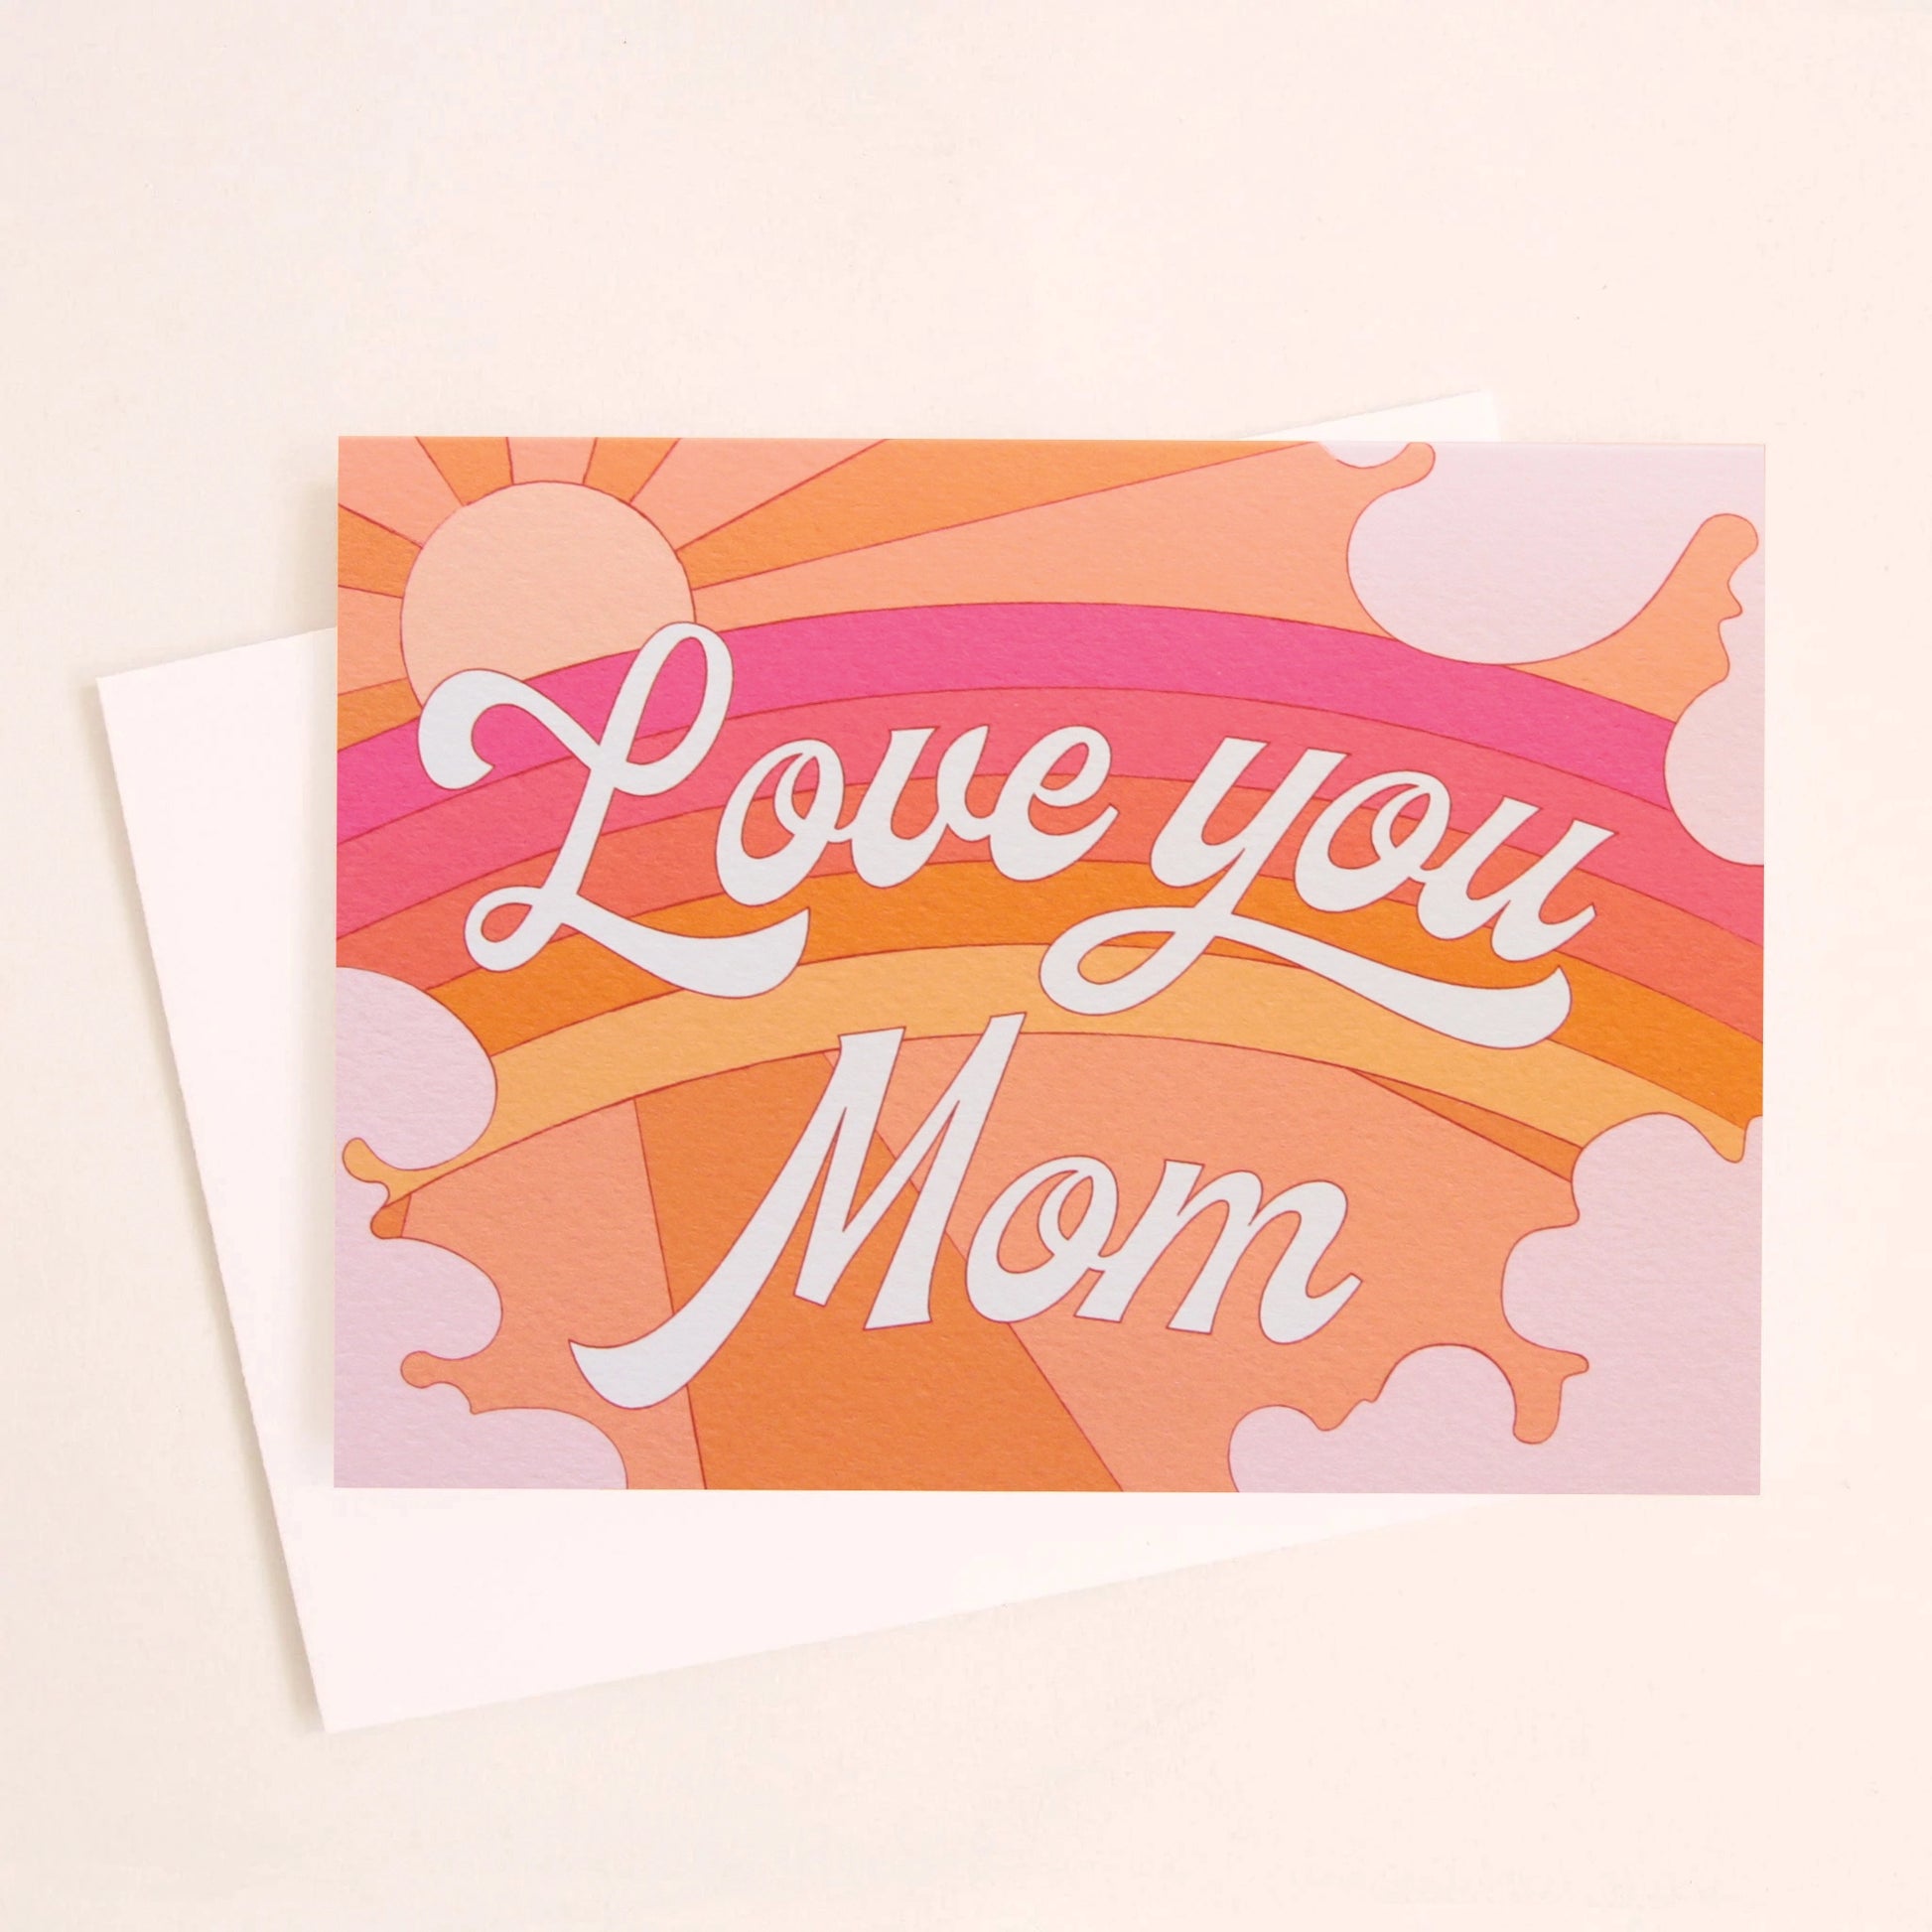 A card with a rainbow graphic made with shades or orange, pink and red along with a shining sun, subtle clouds around the edge and white cursive text that reads, "Love you Mom" in the center as well as a white envelope.